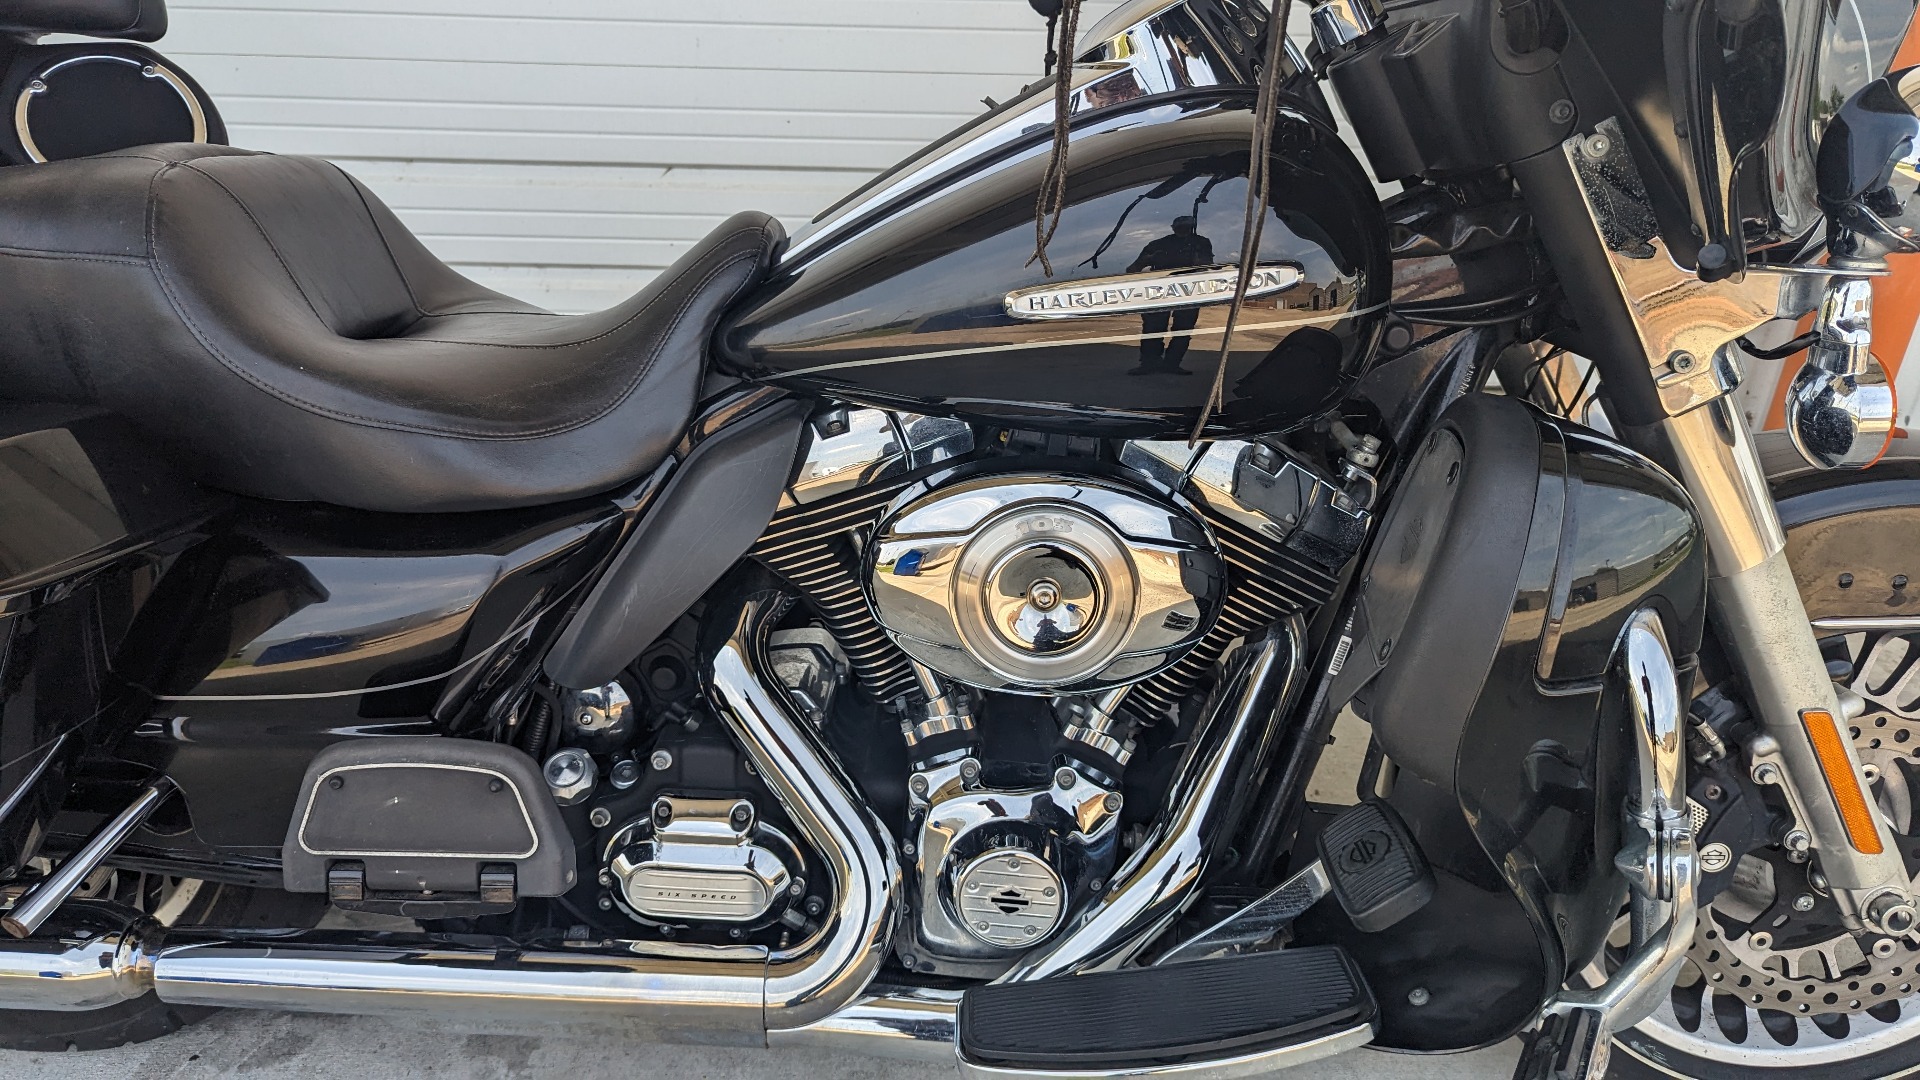 2011 harley davidson electra glide ultra for sale in texas - Photo 4